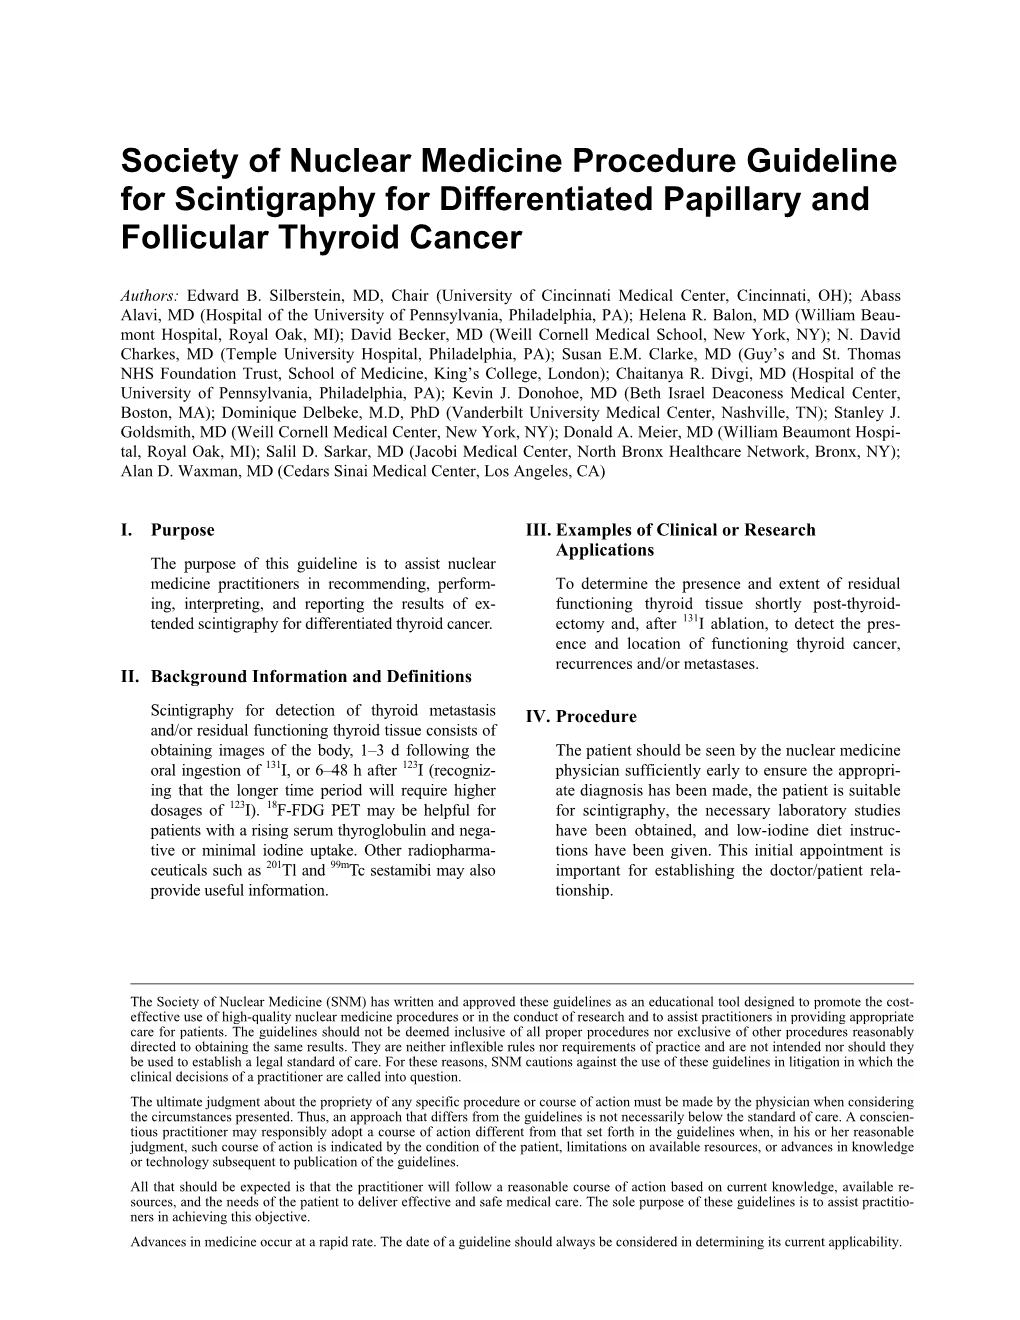 Society of Nuclear Medicine Procedure Guideline for Scintigraphy for Differentiated Papillary and Follicular Thyroid Cancer